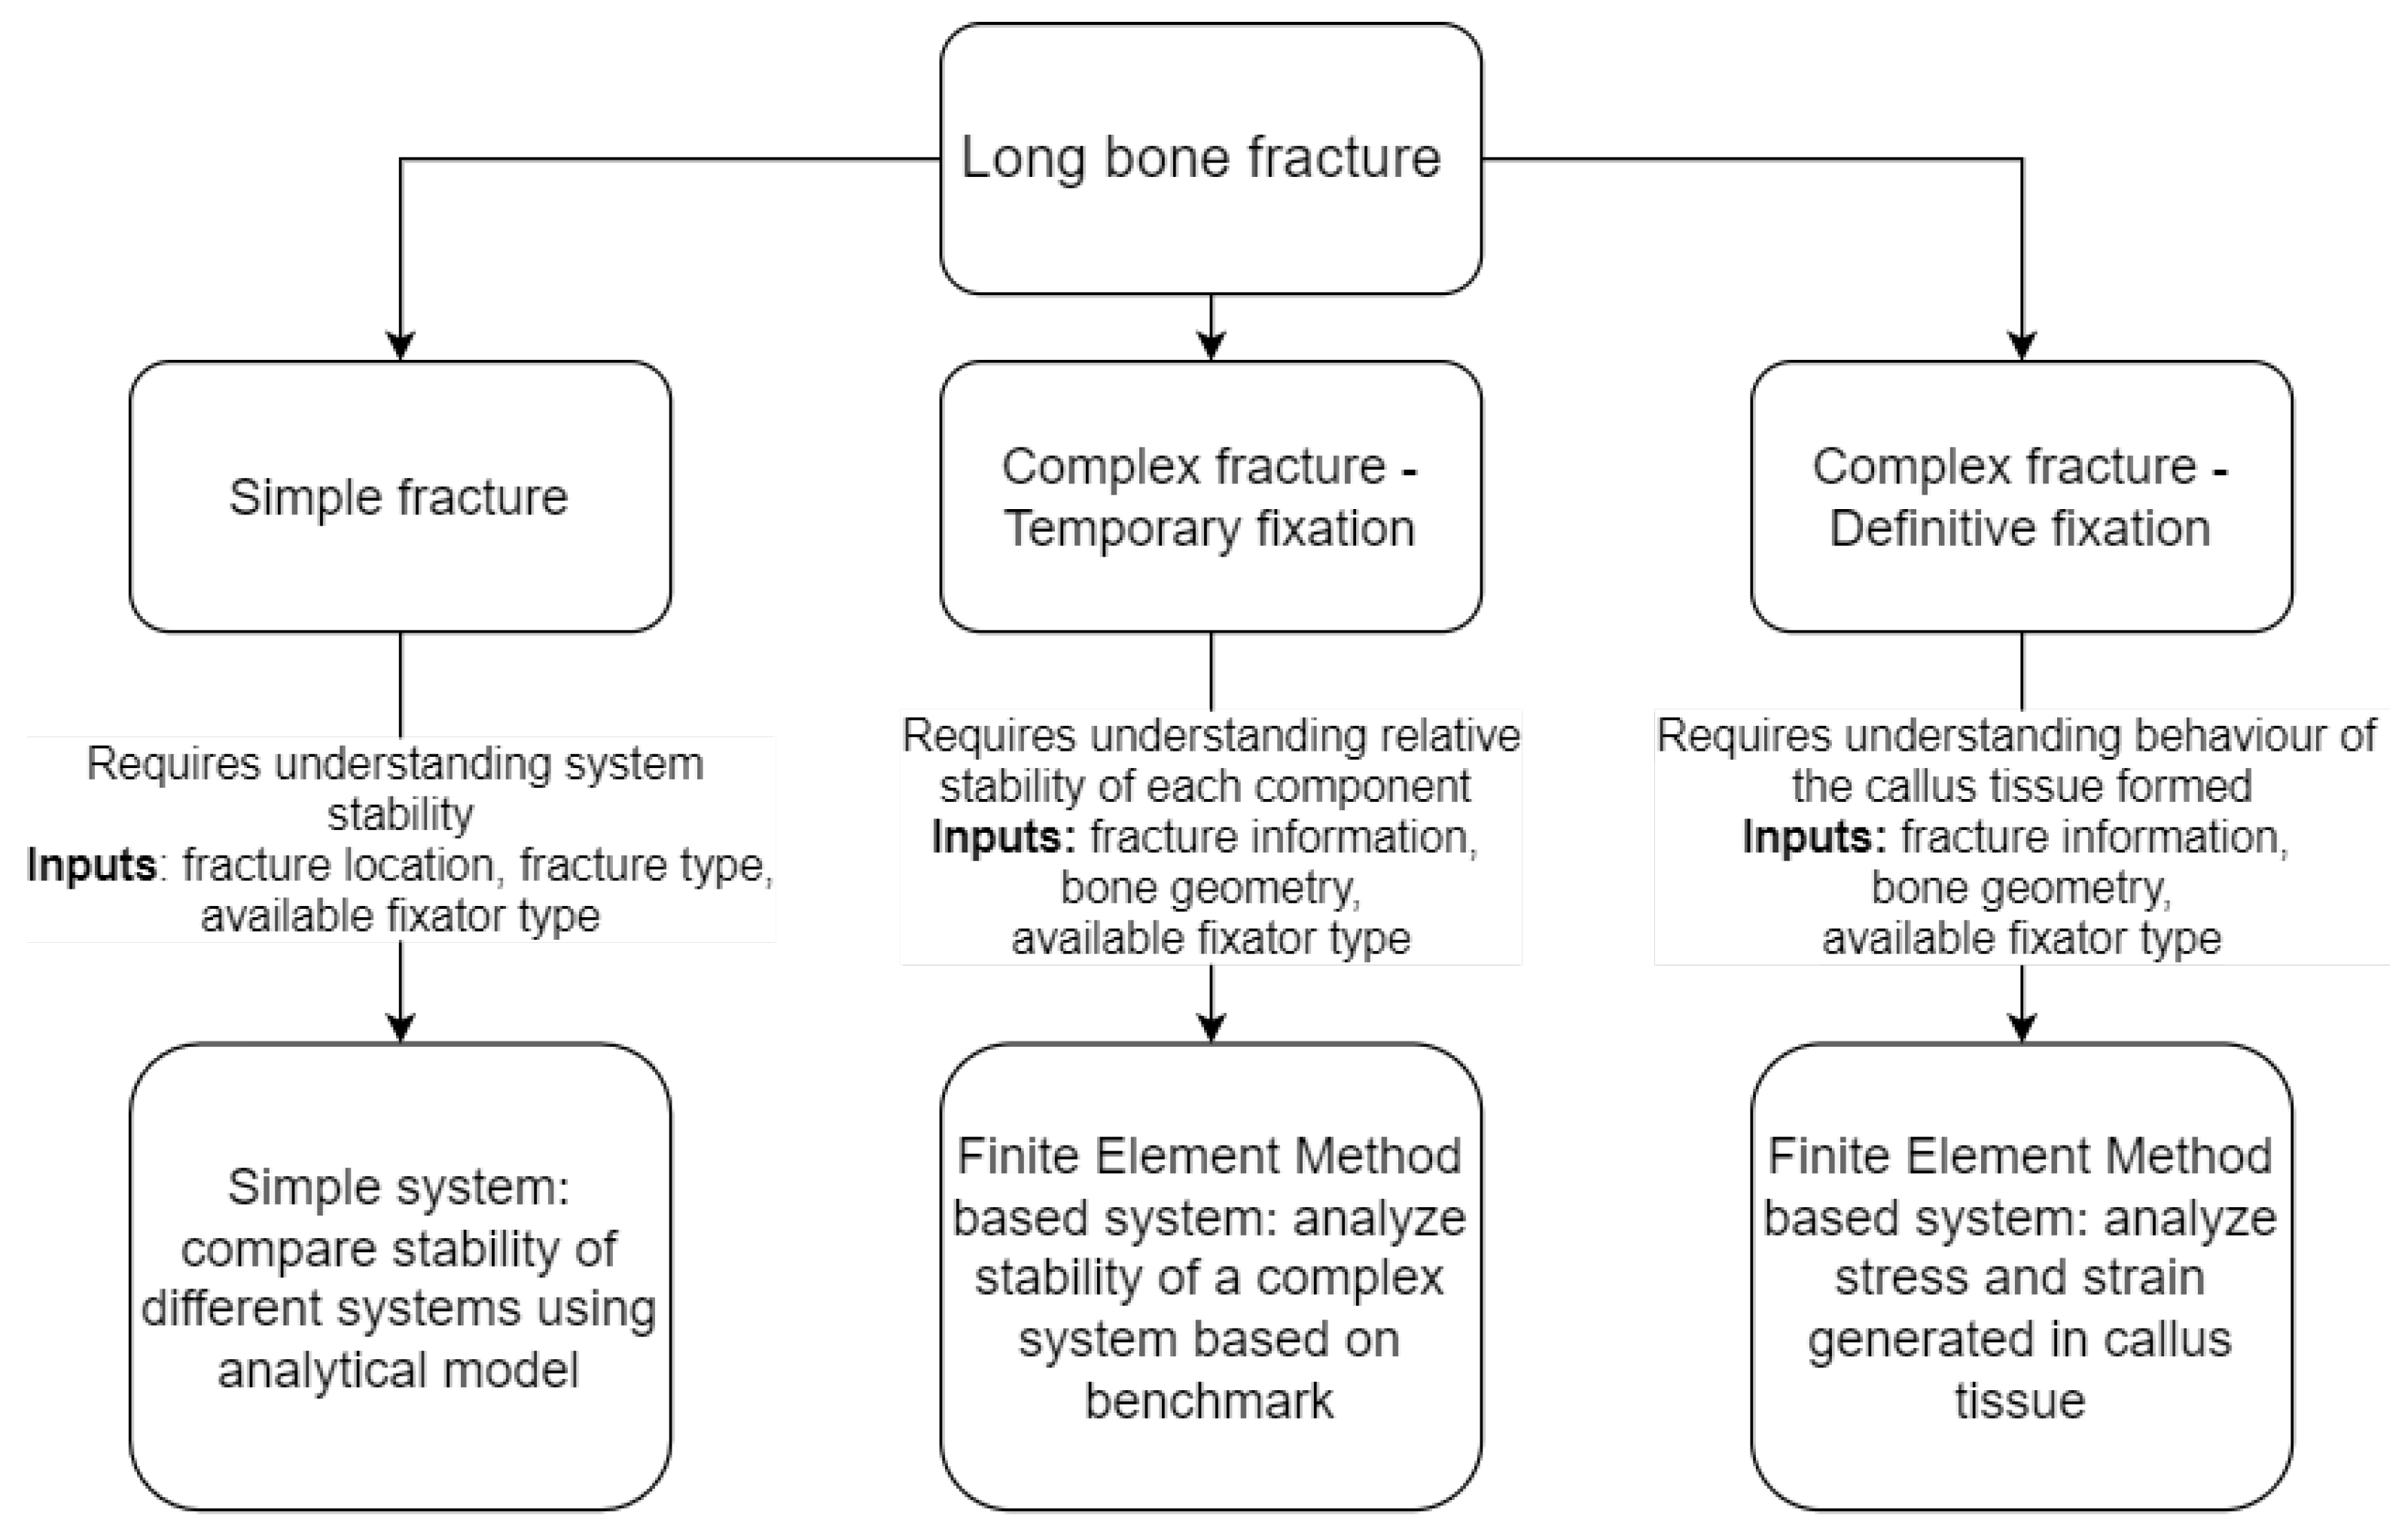 Applied Sciences | Free Full-Text | Biomechanical Evaluation Method to  Optimize External Fixator Configuration in Long Bone Fractures—Conceptual  Model and Experimental Validation Using Pilot Study | HTML